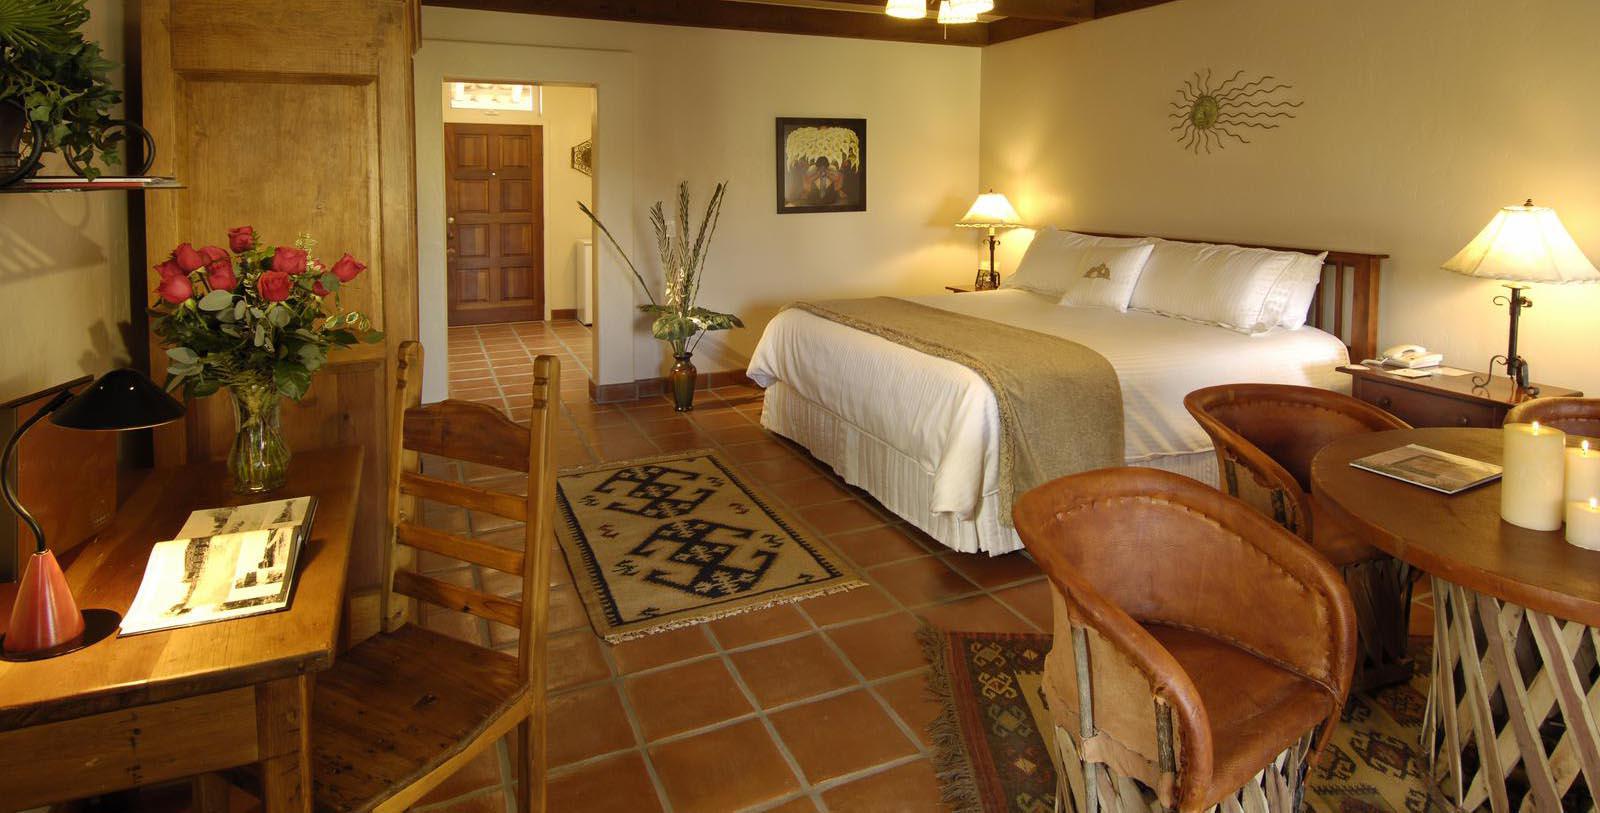 Image of guestroom Tubac Golf Resort and Spa, 1959, Member of Historic Hotels of America, in Tubac, Arizona,Accommodations